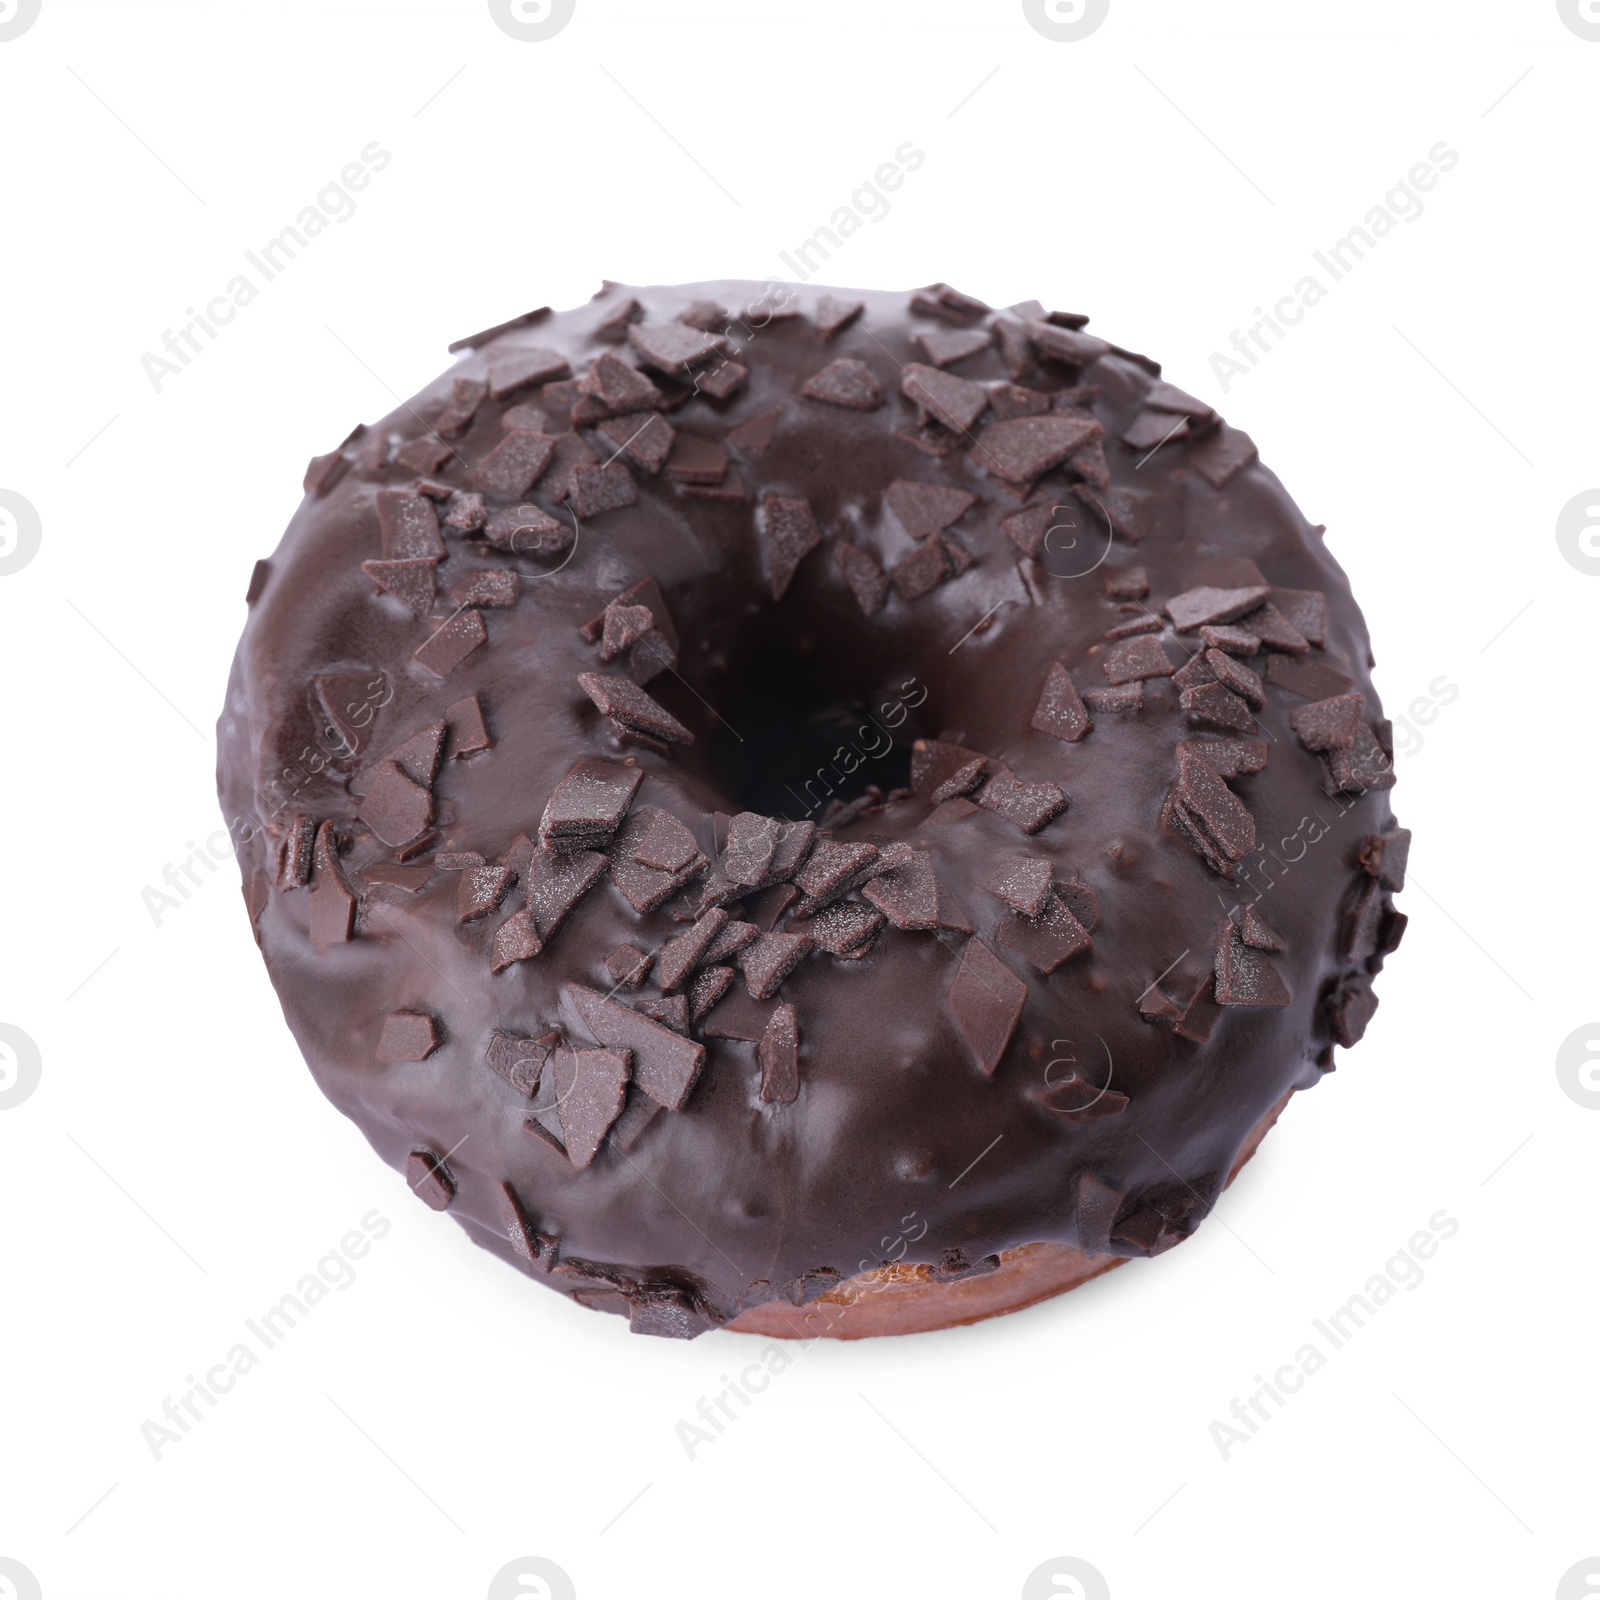 Photo of Tasty glazed donut decorated with dark chocolate sprinkles isolated on white